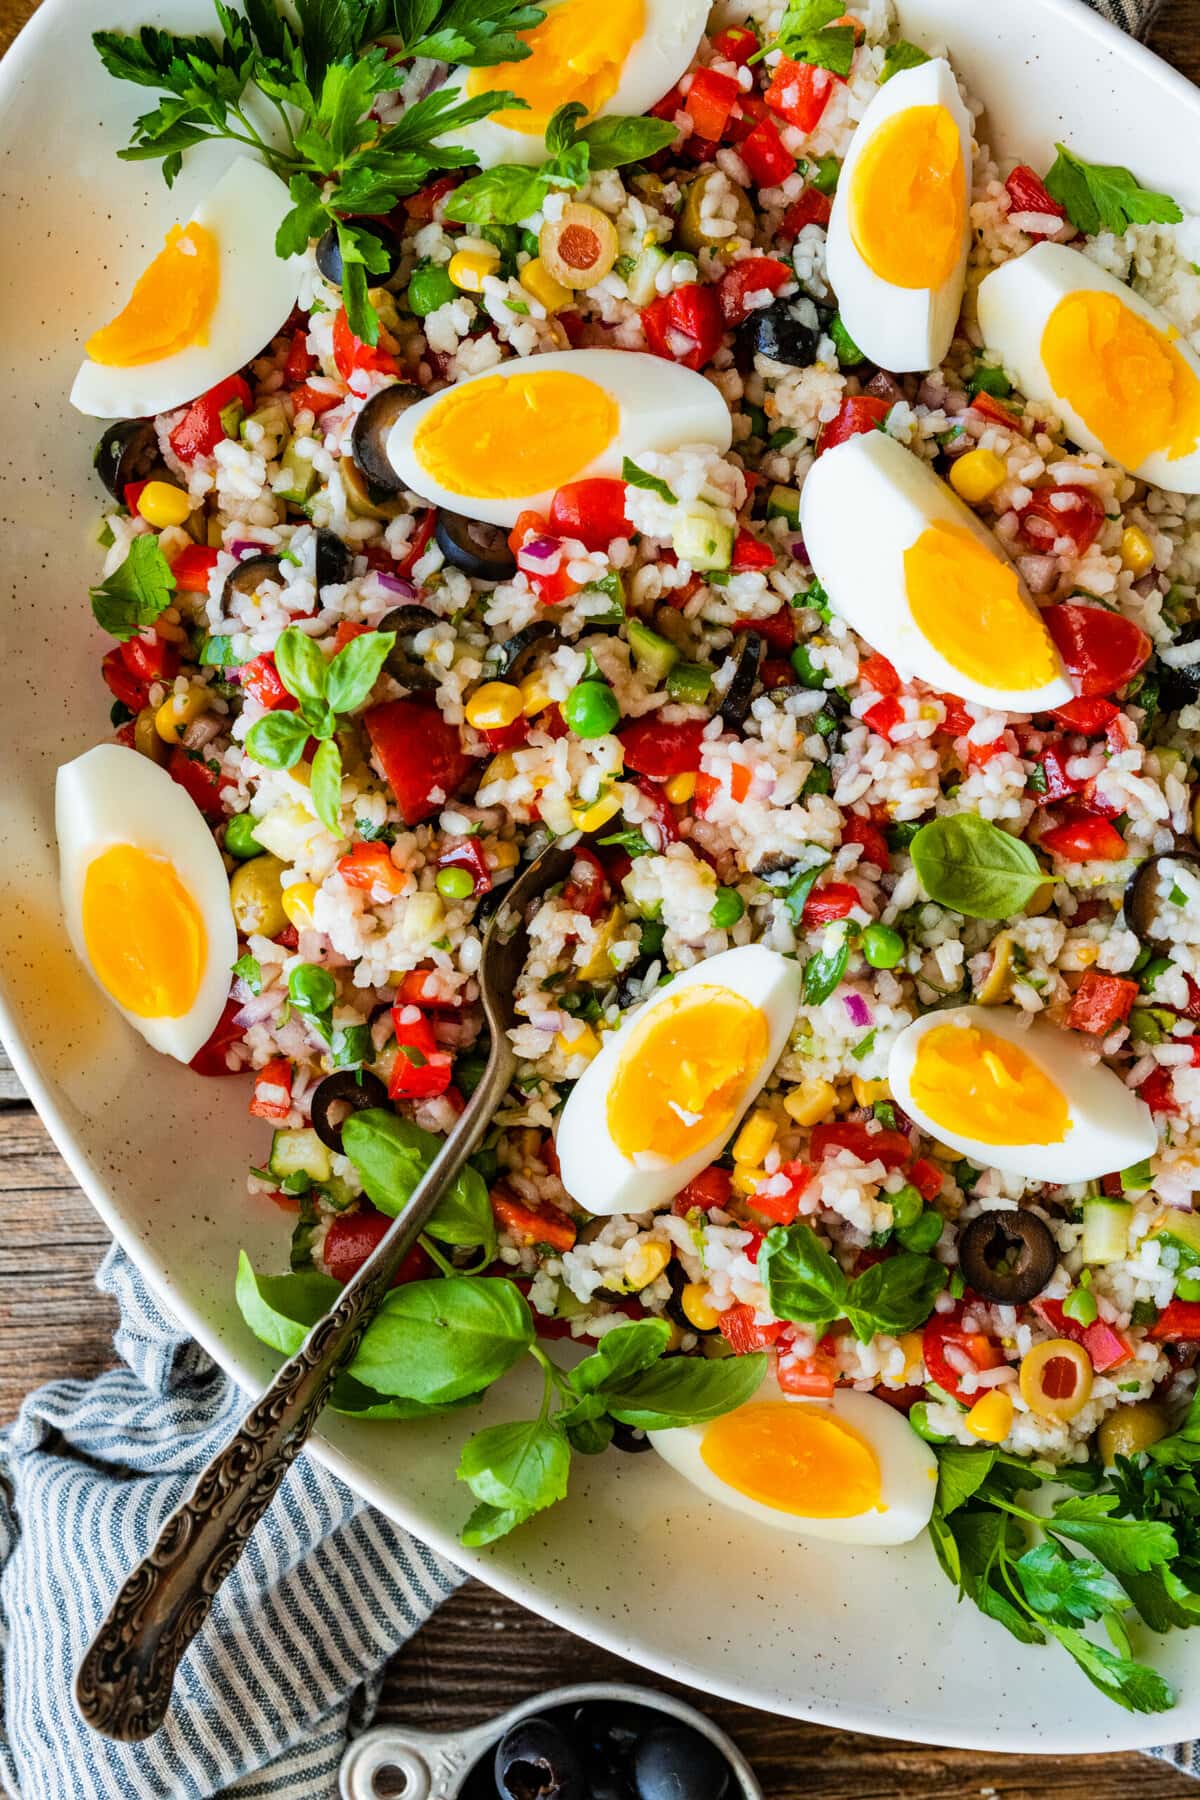 Easy Italian rice salad (insalata di riso) in a large platter with the hard boiled eggs sliced on top.